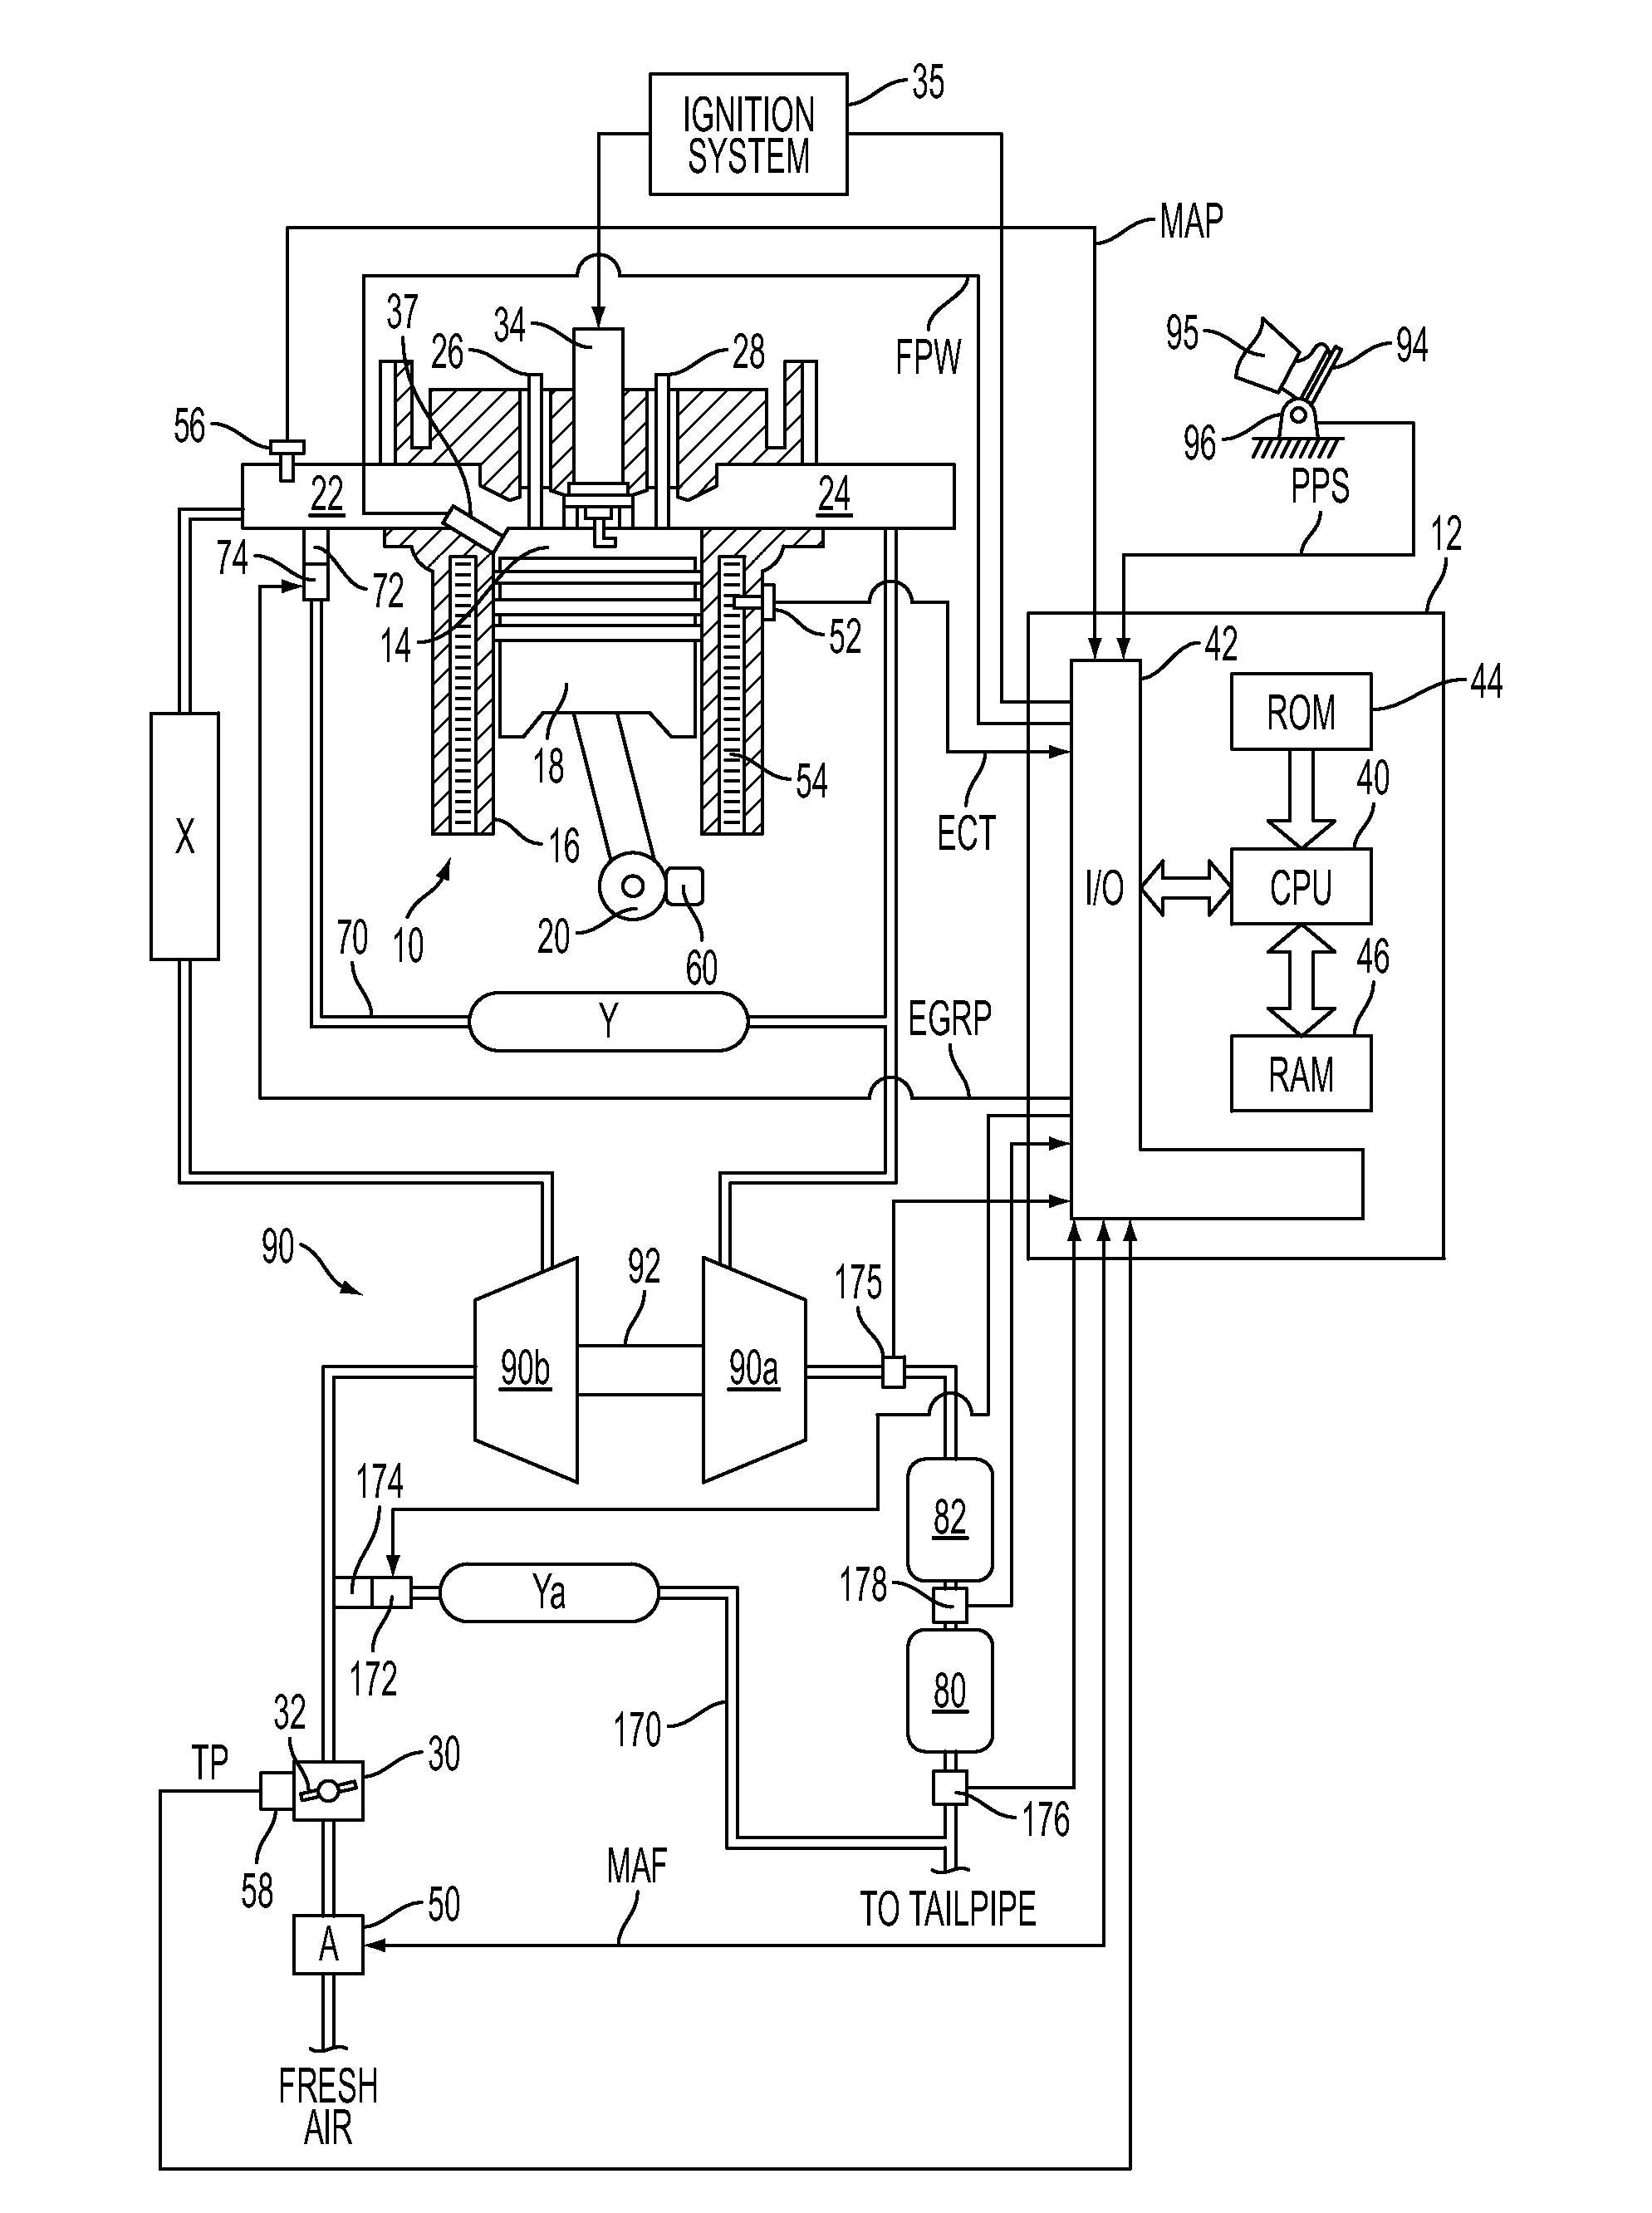 Fuel control for spark ignited engine having a particulate filter system